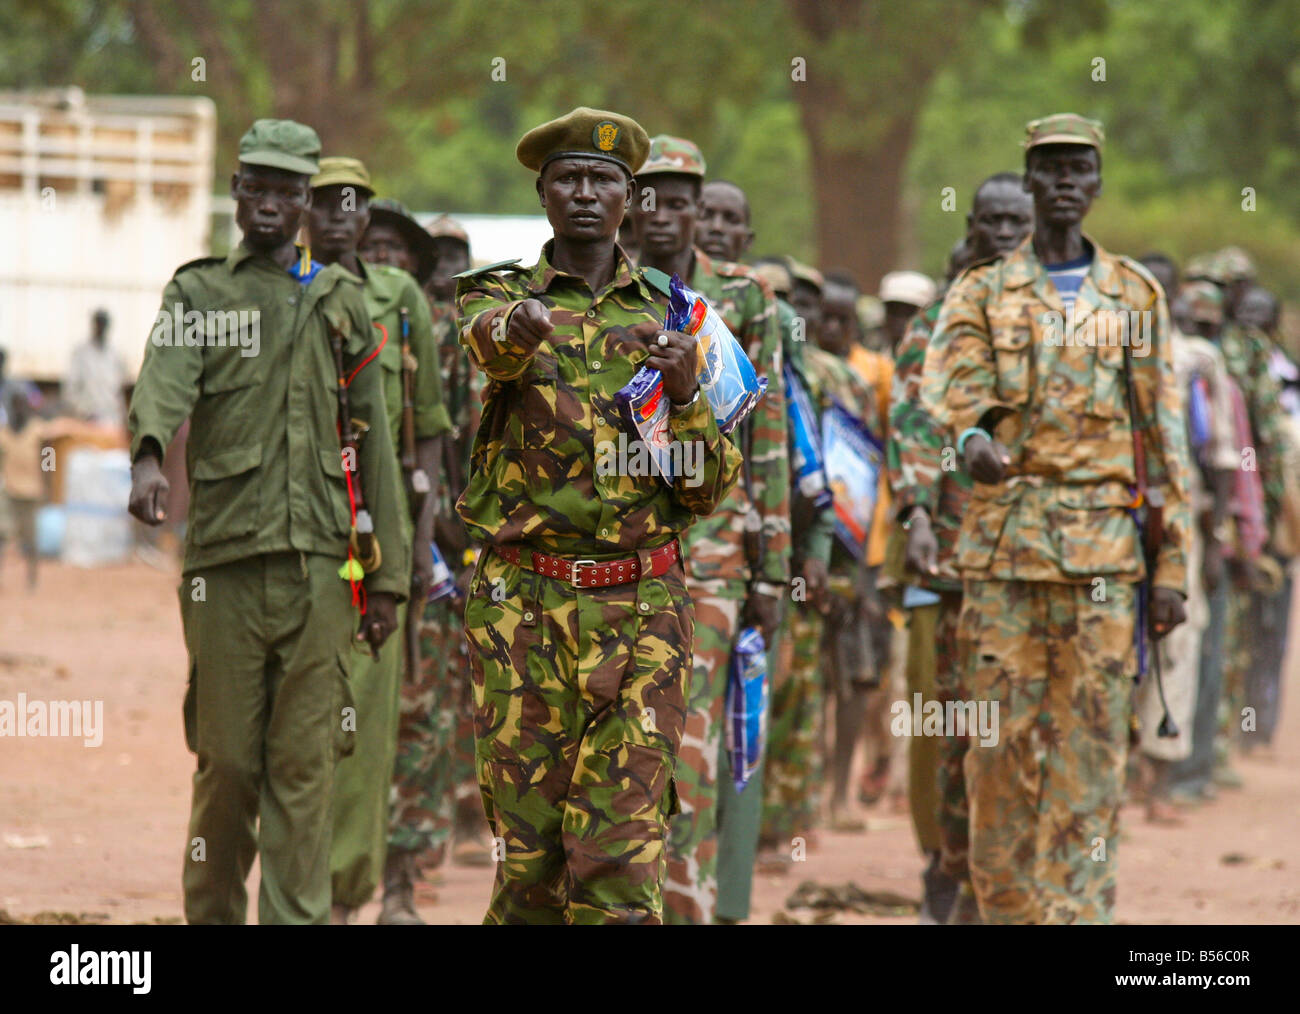 A contingent of the Sudan People's Liberation Army (SPLA) marches with mosquito nets in hand. Stock Photo